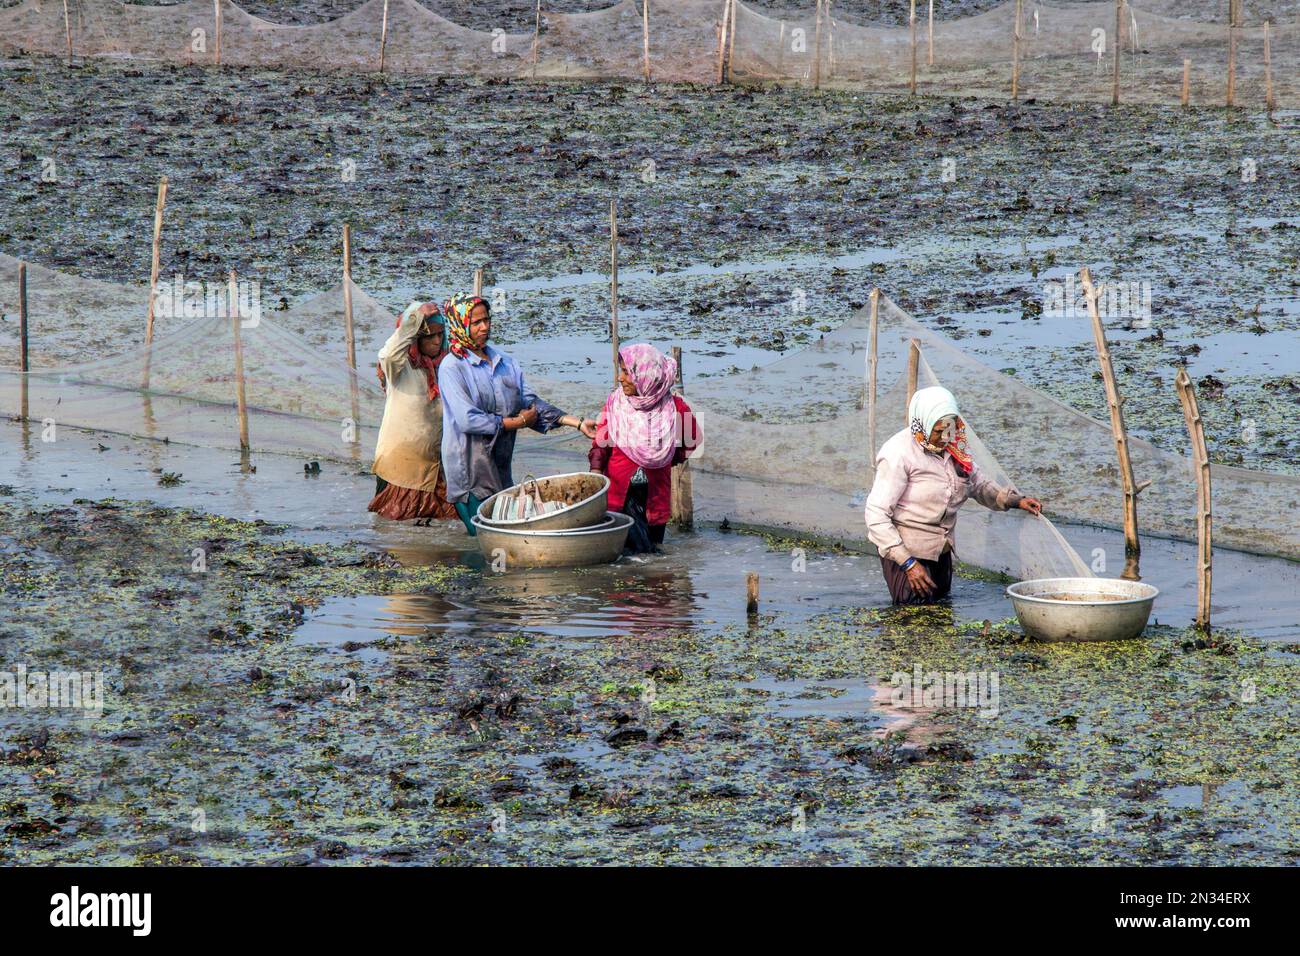 water chestnut (paniphal) collecting at rural west bengal india Stock Photo